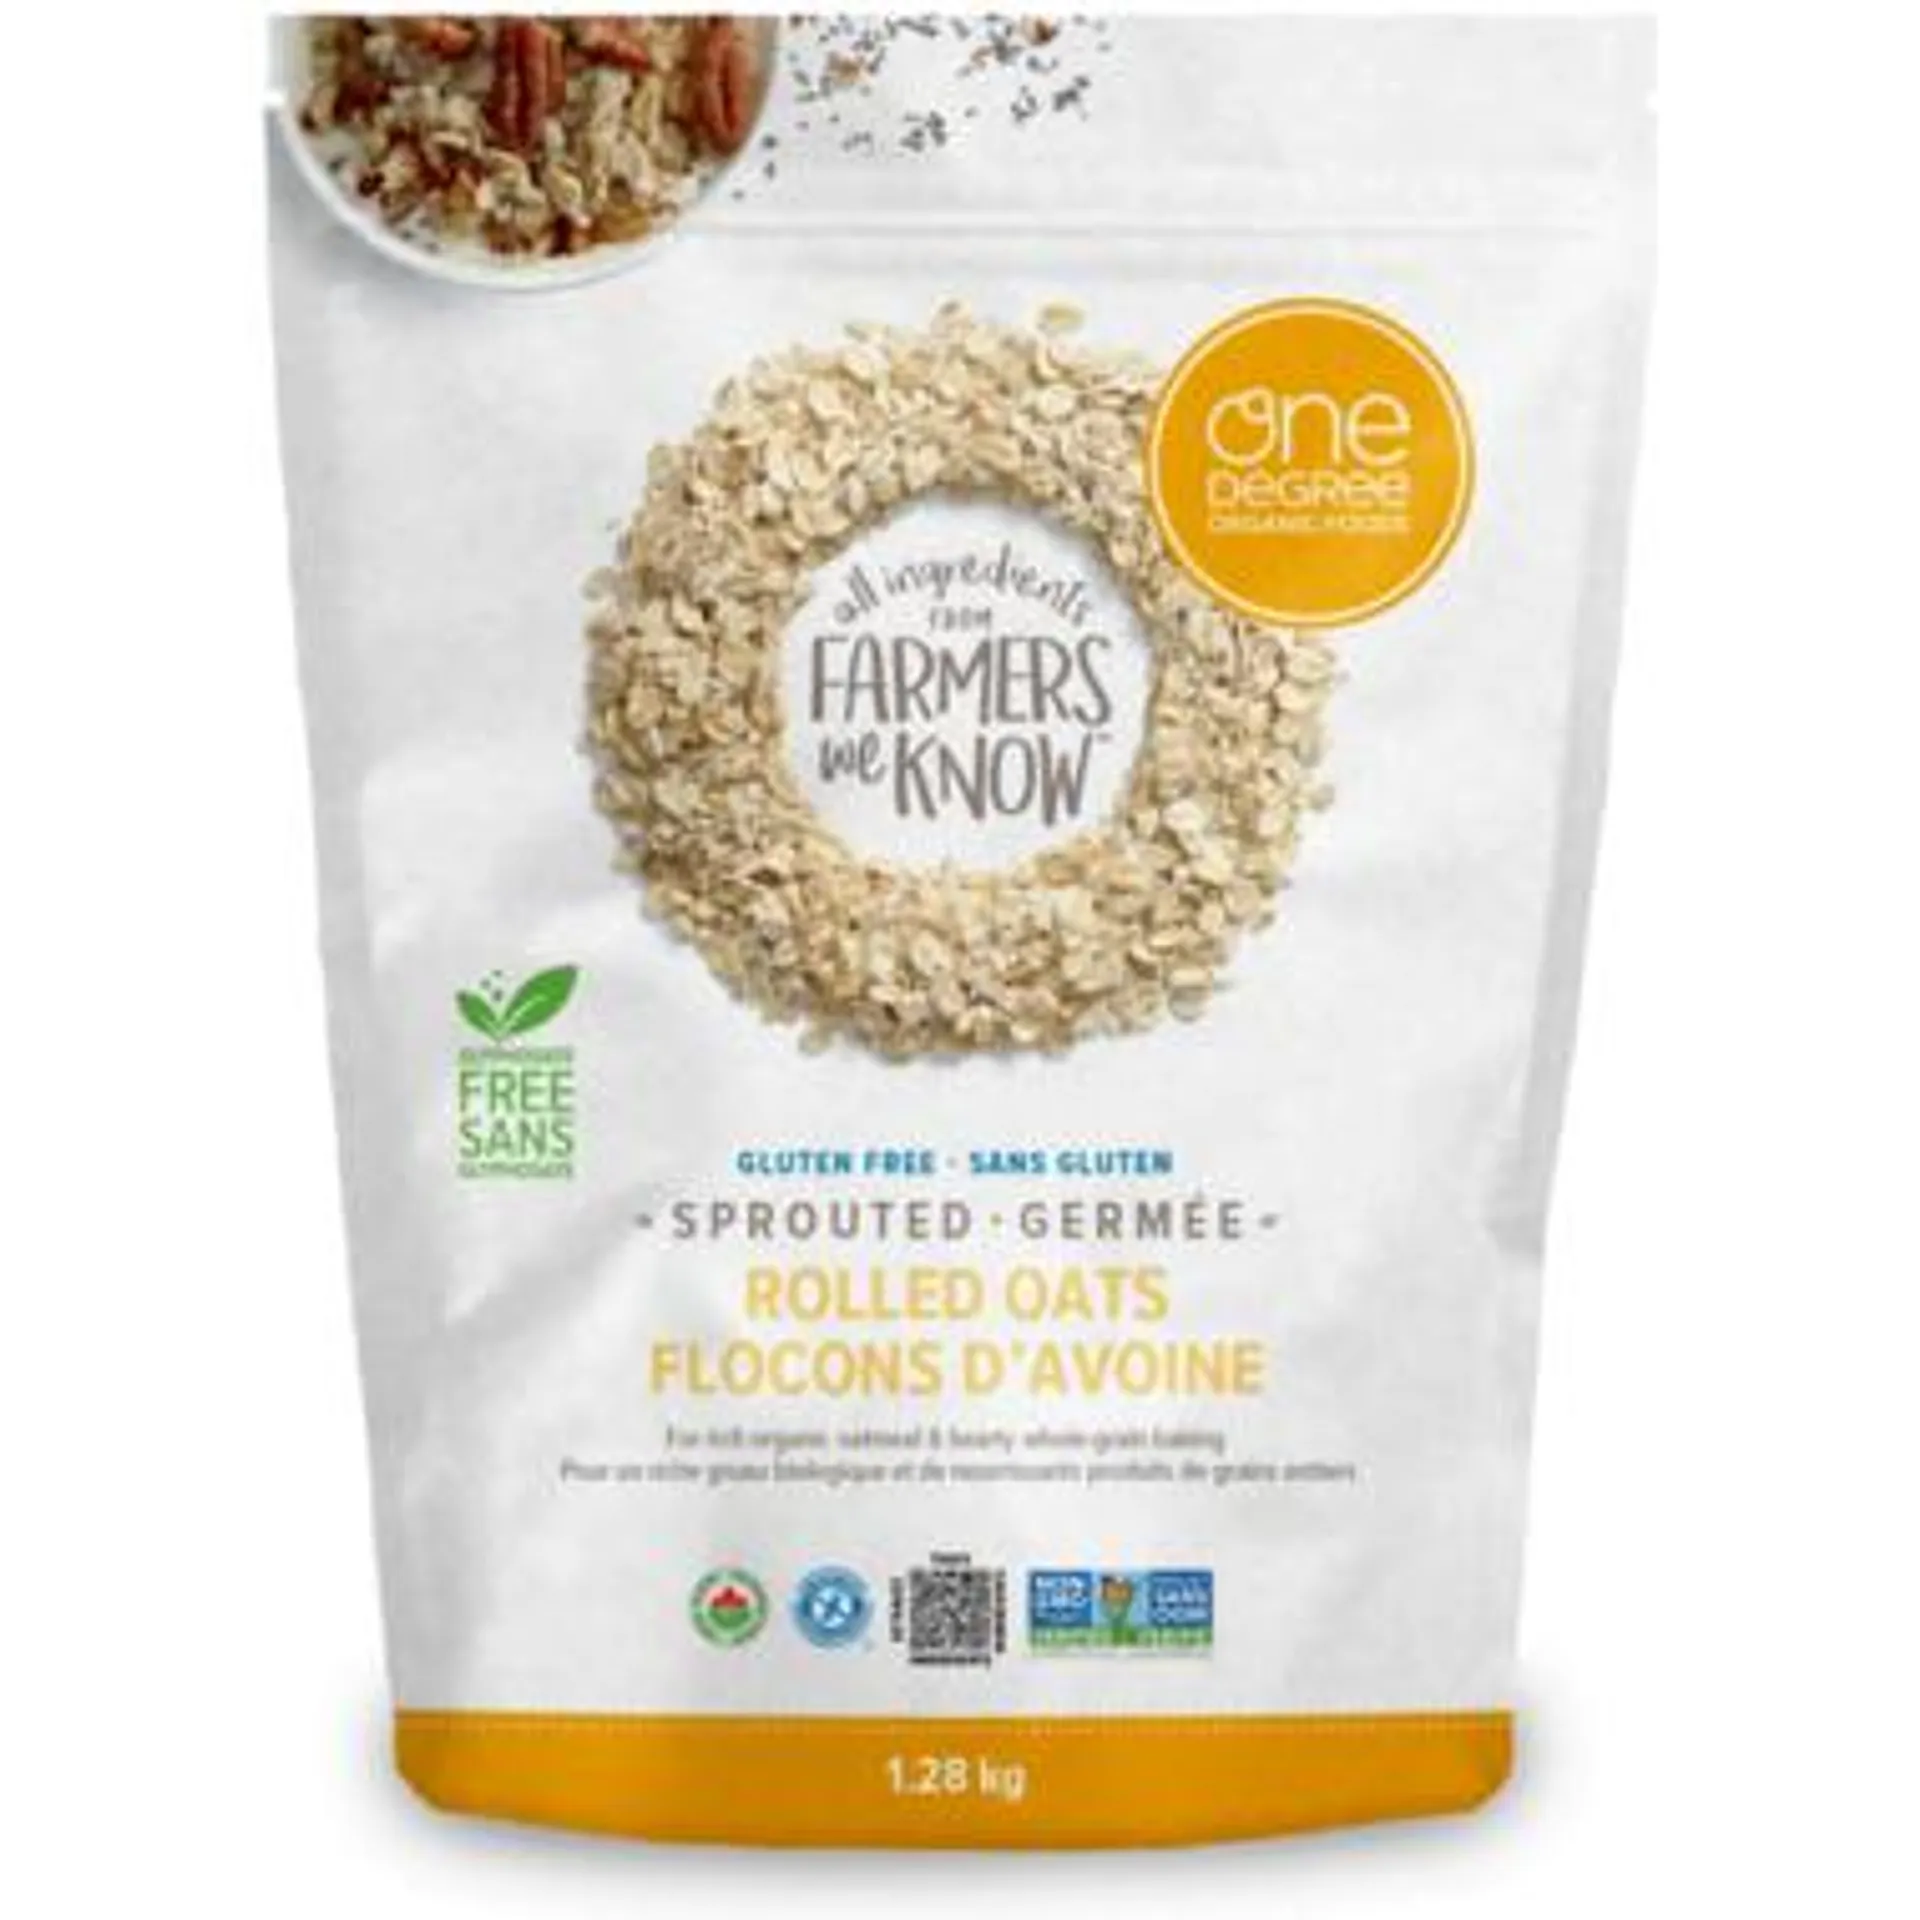 Sprouted Rolled Oats